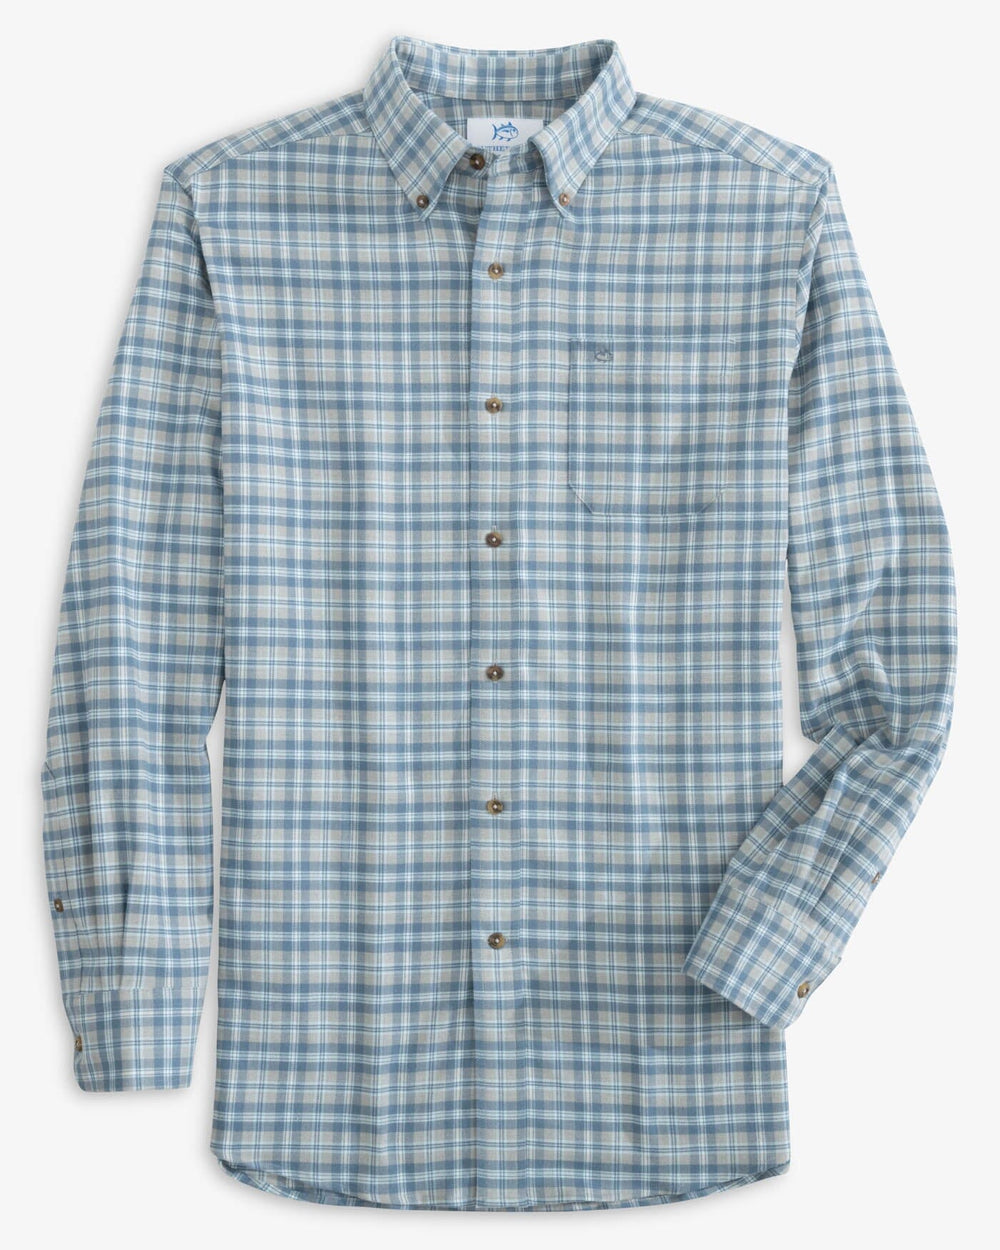 The front view of the Southern Tide Heather Lakewood Plaid Sport Shirt by Southern Tide - Heather Ultimate Grey